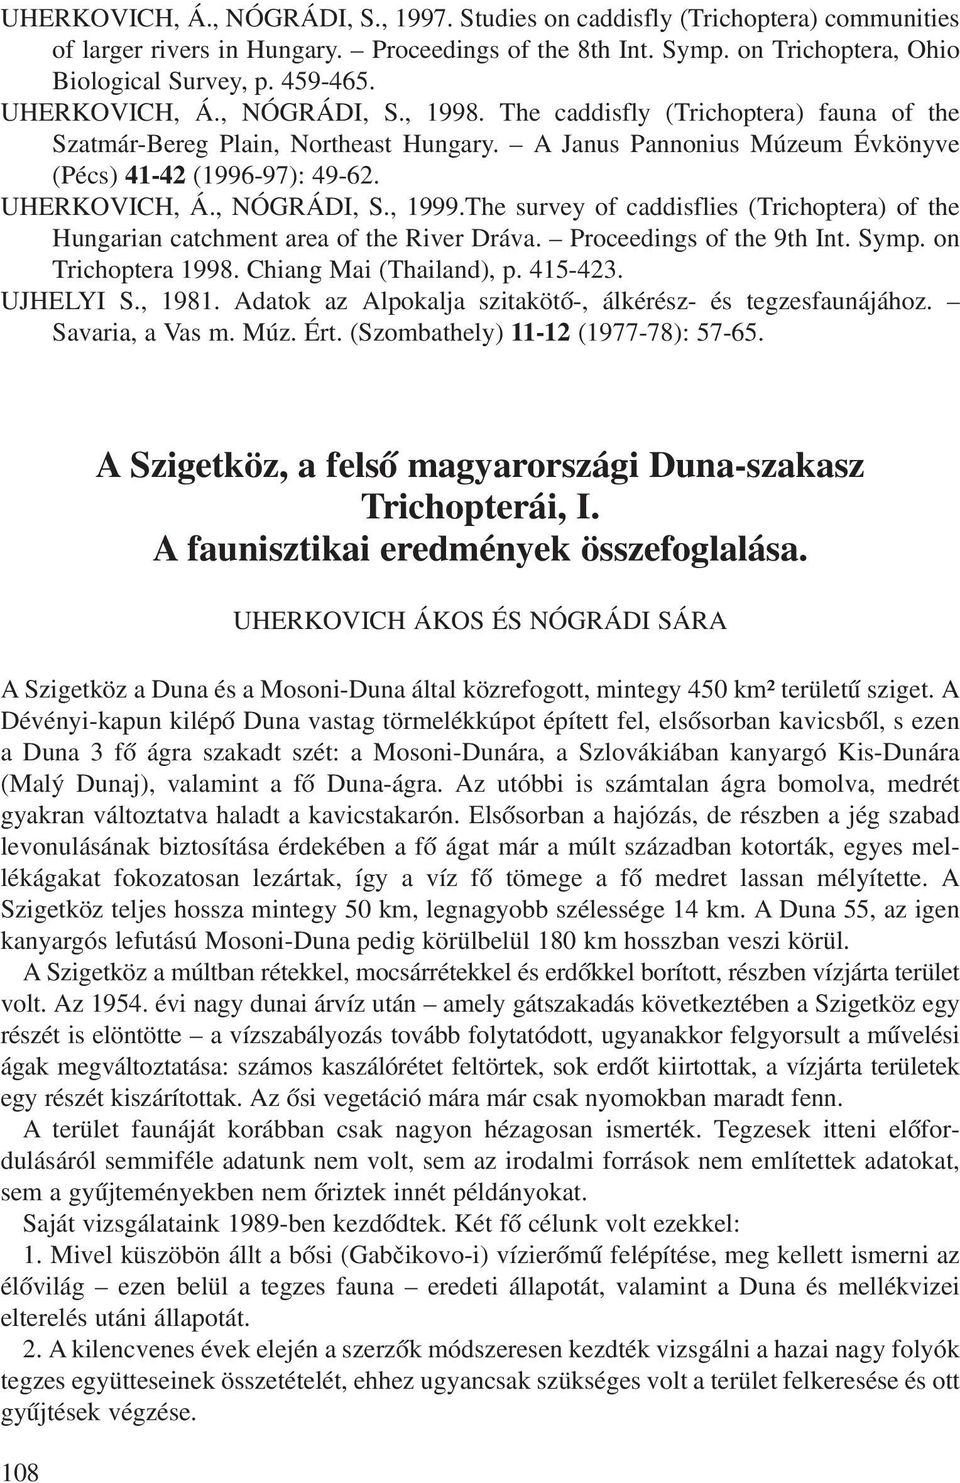 , NÓGRÁDI, S., 1999.The survey of caddisflies (Trichoptera) of the Hungarian catchment area of the River Dráva. Proceedings of the 9th Int. Symp. on Trichoptera 1998. Chiang Mai (Thailand), p.